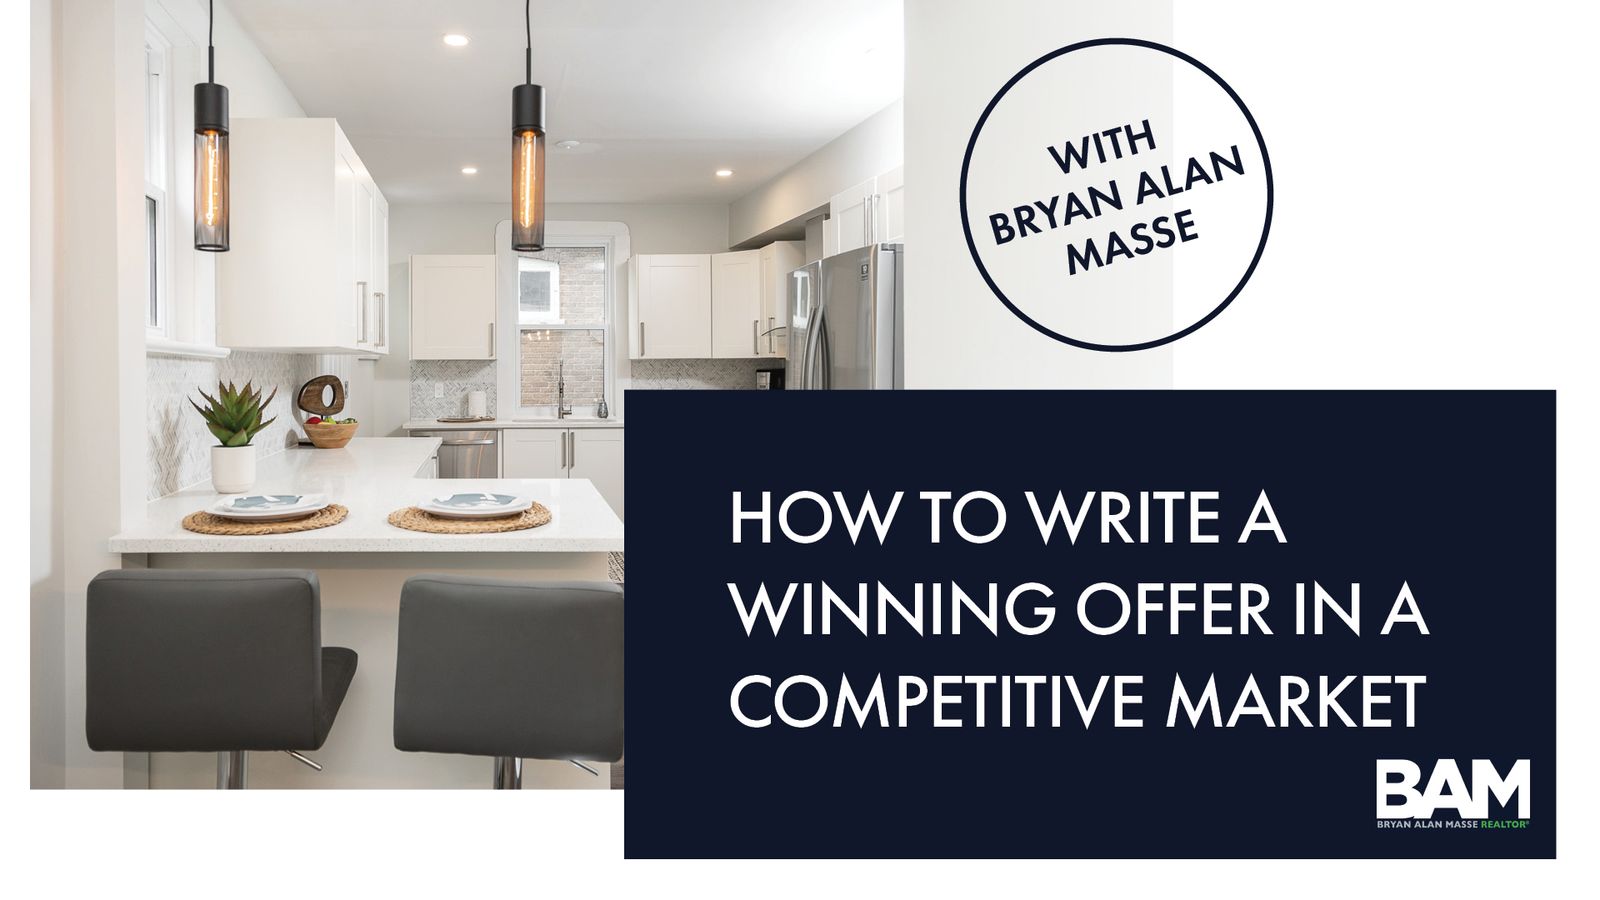 How to Write a Winning Offer in a Competitive Market